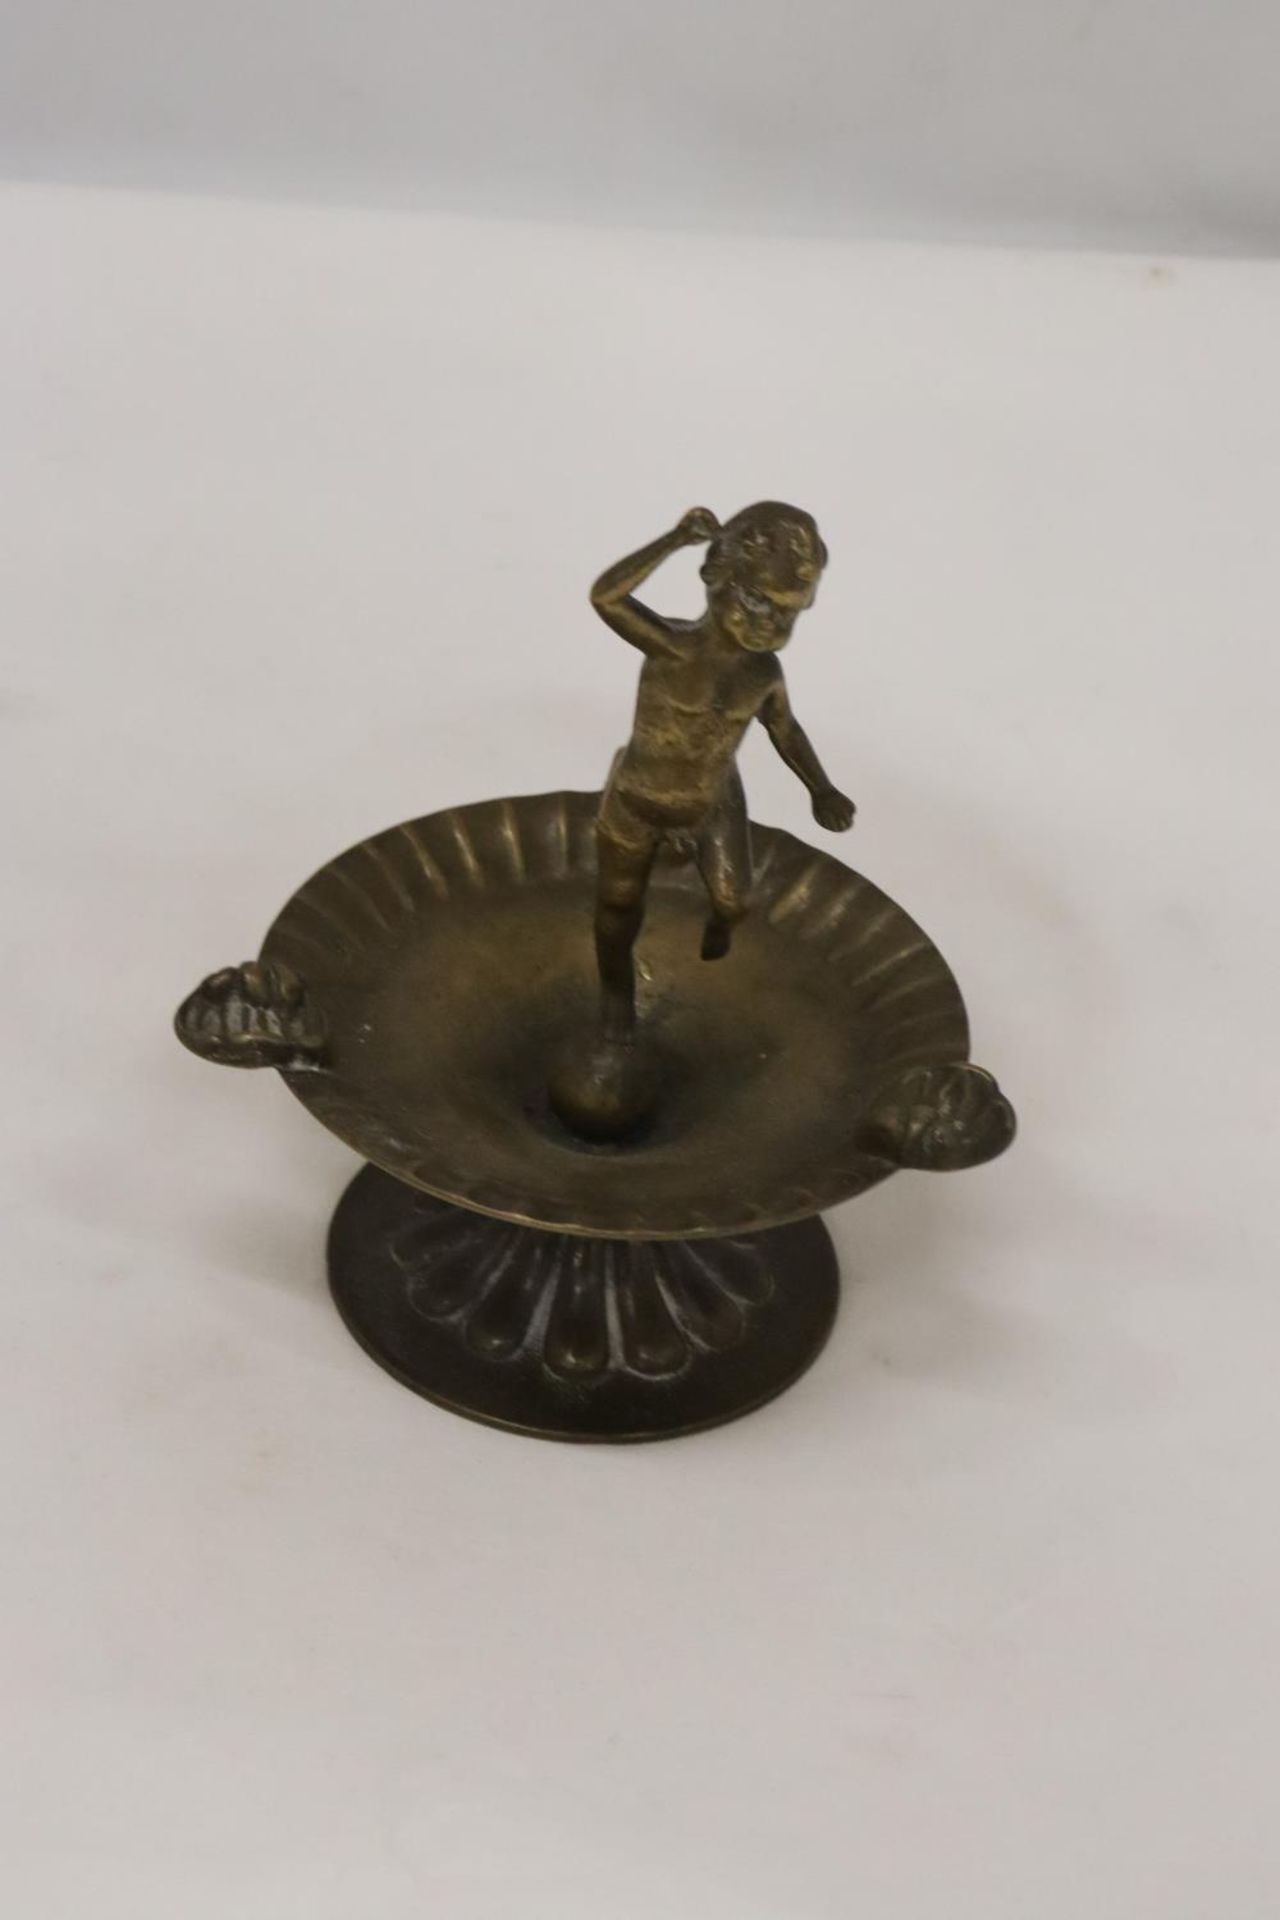 A VINTAGE BRASS ASHTRAY WITH CHERUB DECORATION - Image 4 of 4